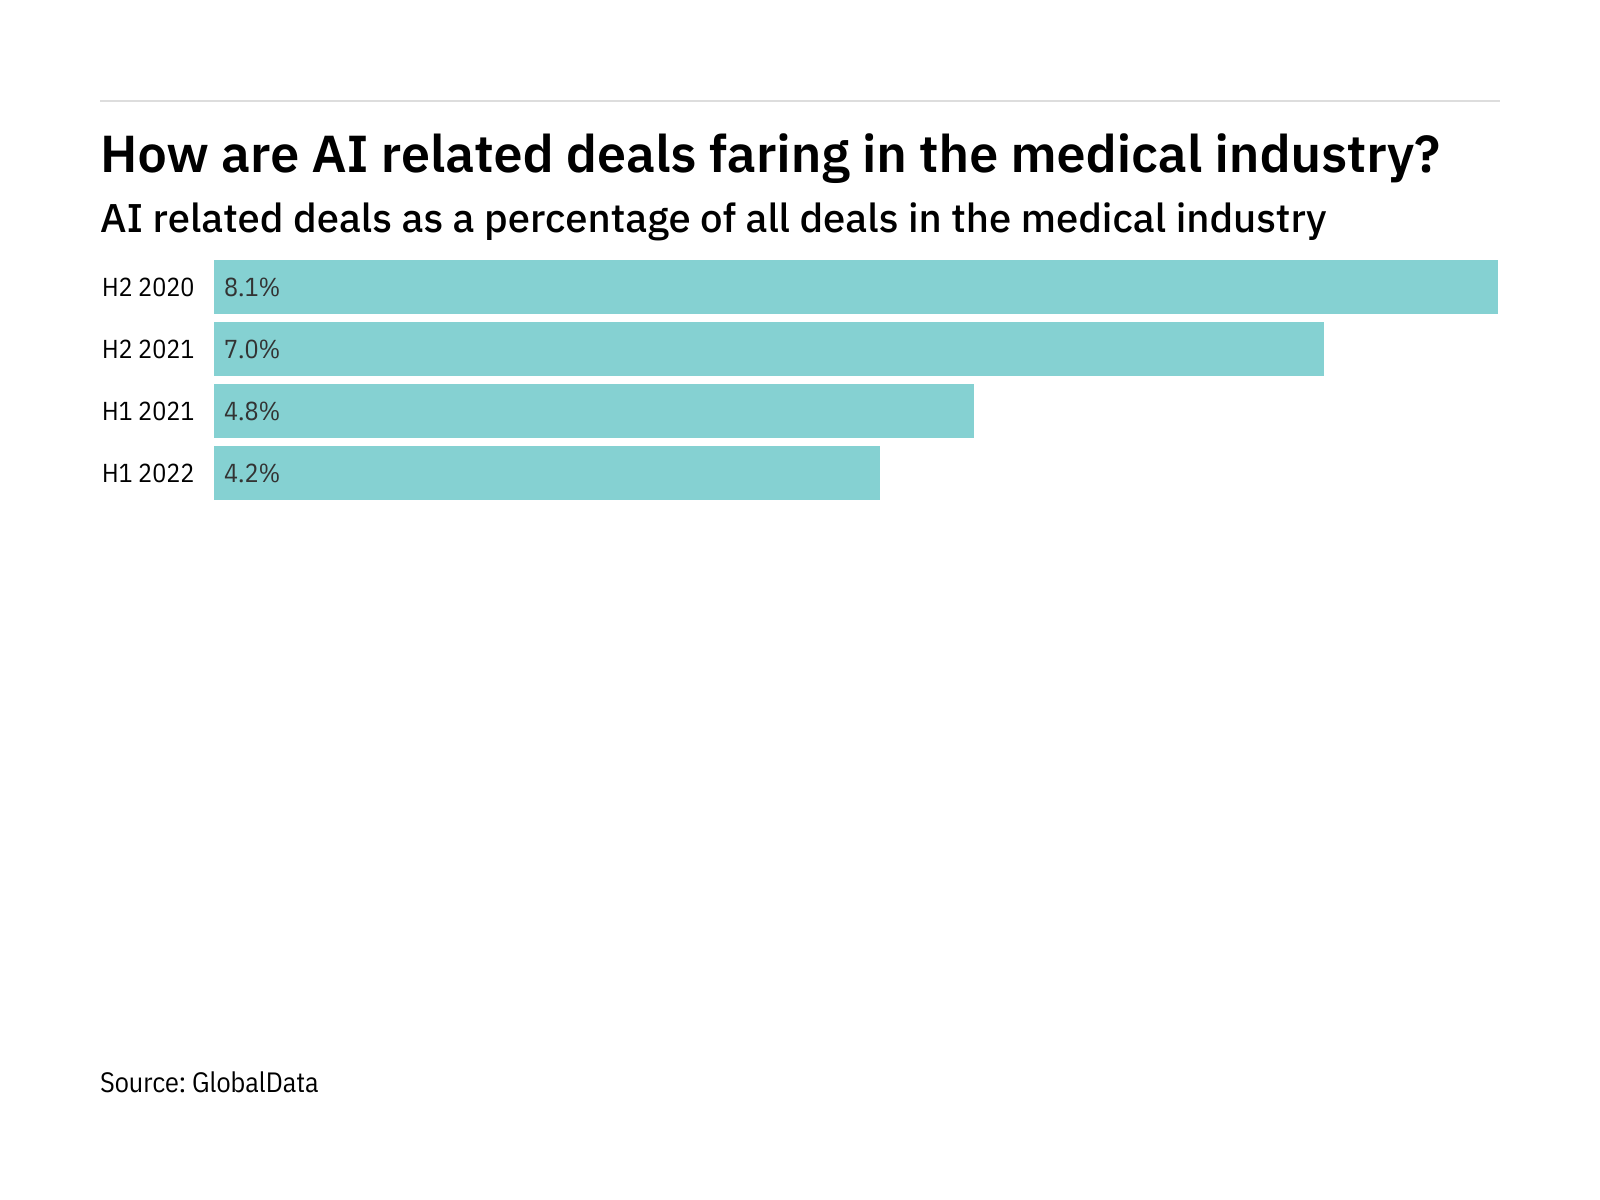 AI deals in medical industry dropped in H1 2022